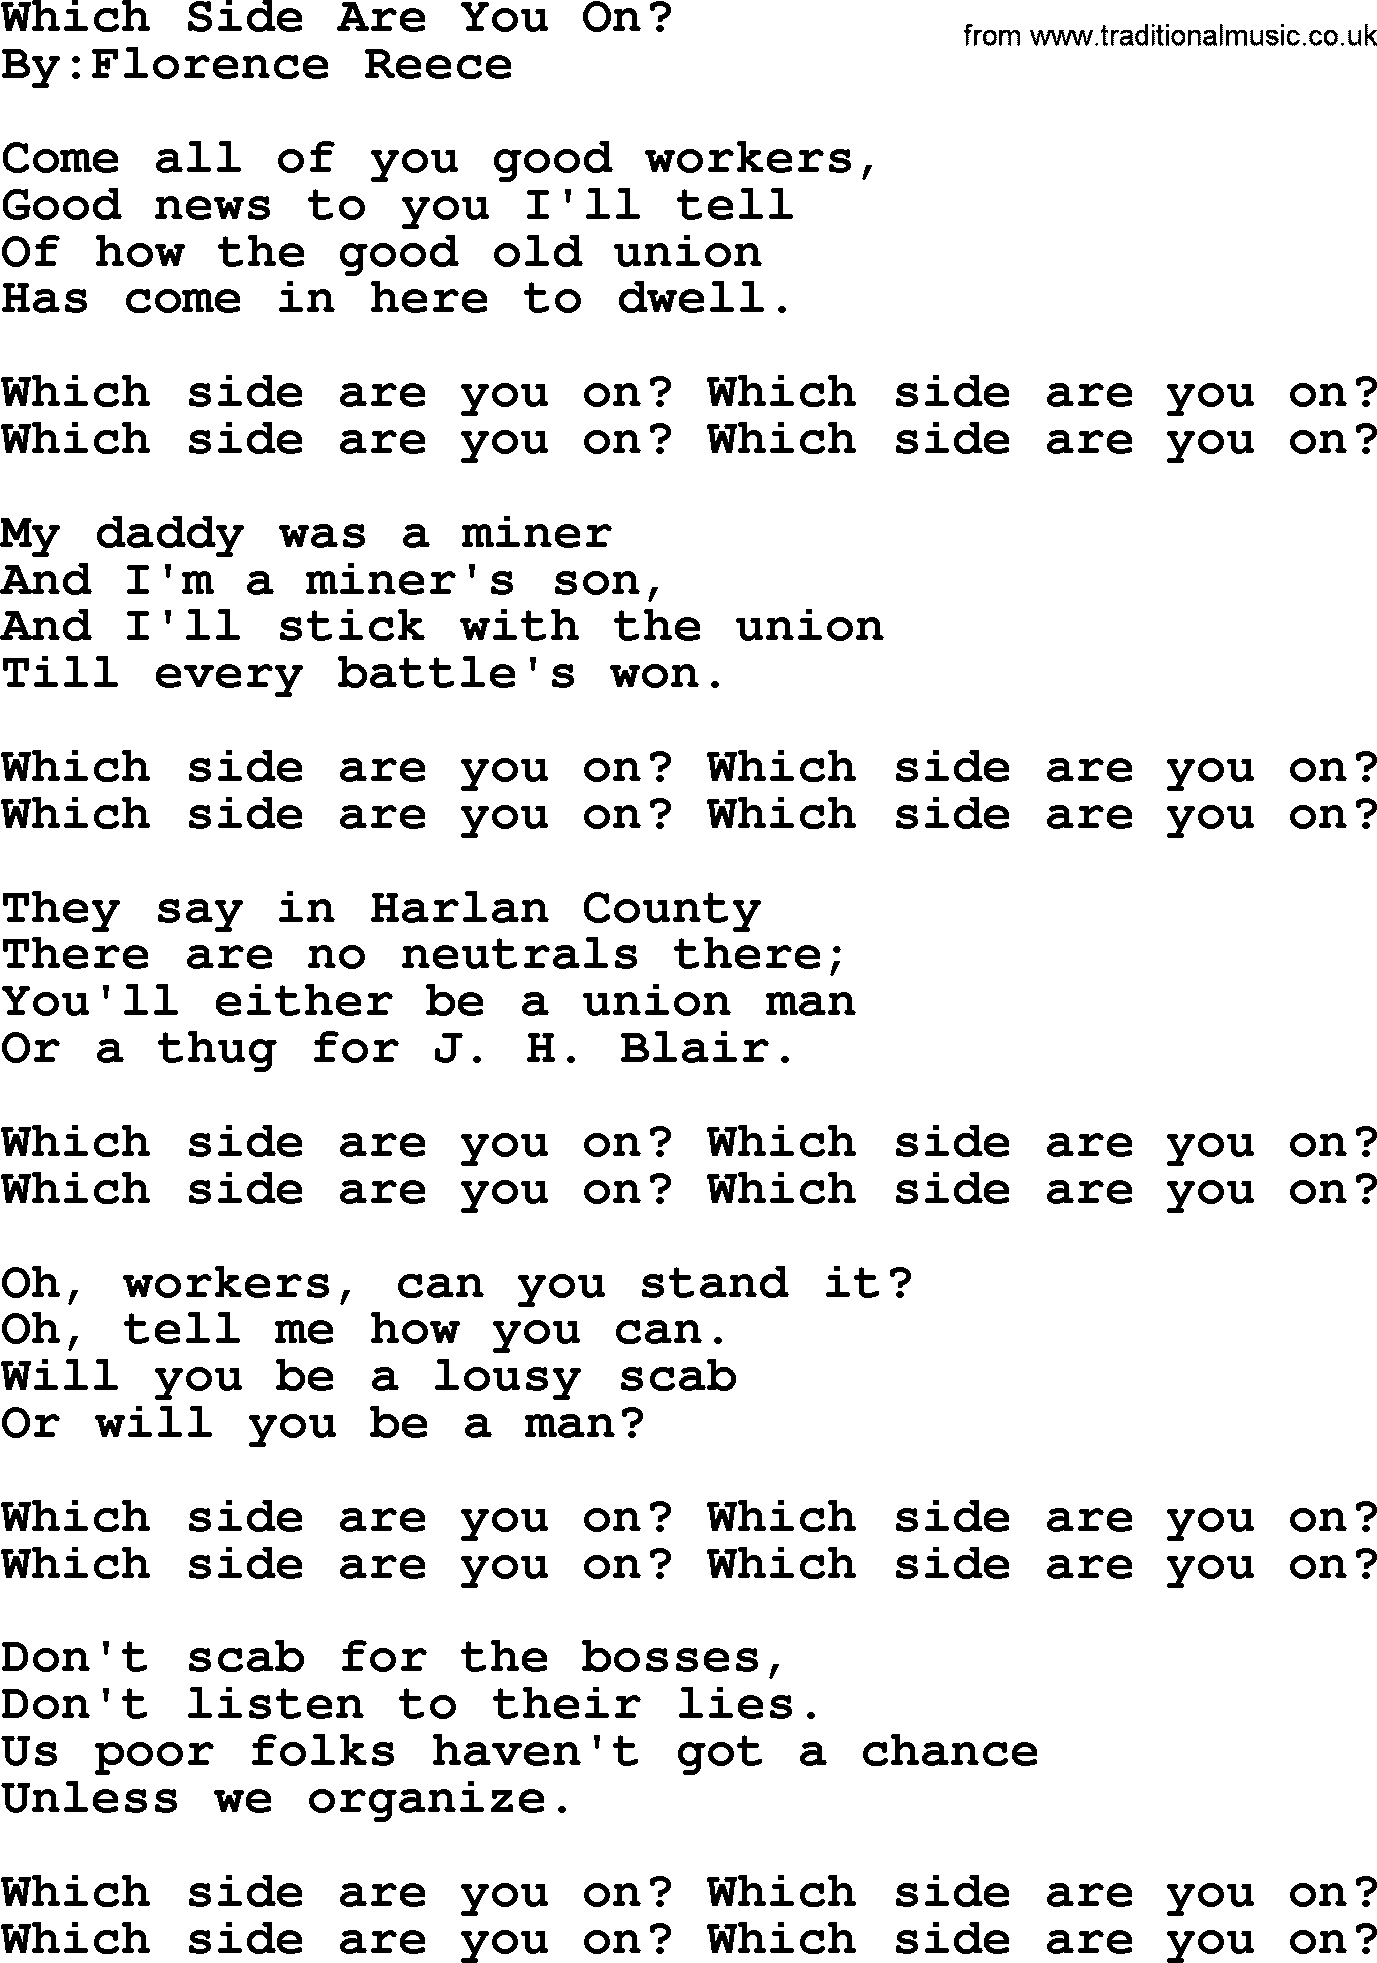 Political, Solidarity, Workers or Union song: Which Side Are You On, lyrics